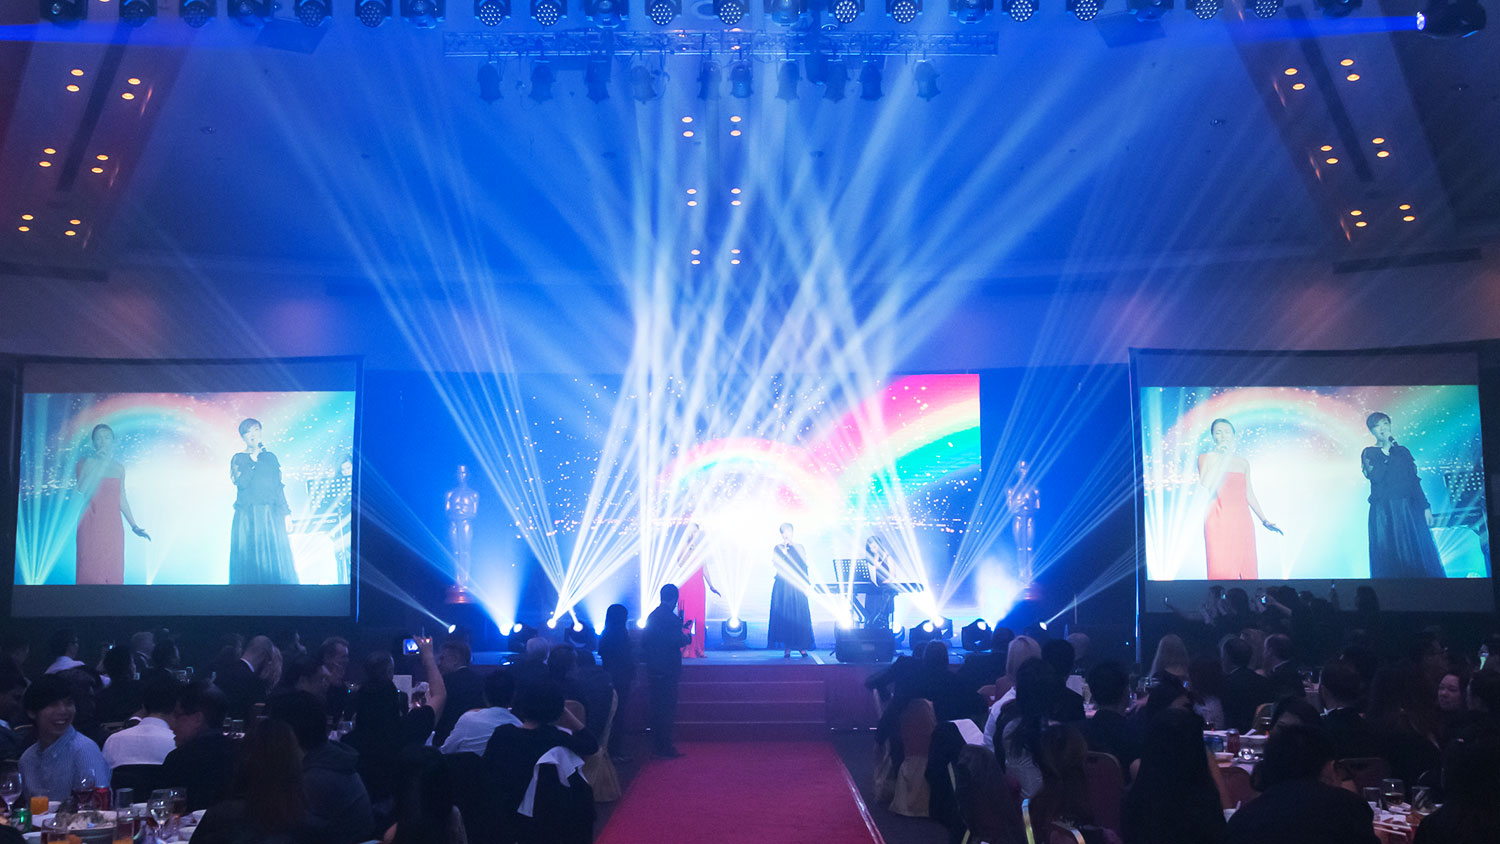 We provide projector rental services in Hong Kong. We own the equipment and have the in-house technicians to operate it to perfection. The audio-visual component of live events has become highly technology dependent. Participants expect high-quality projection displays at conferences, gala dinners, exhibitions and meetings. Video projection enables presentations, live feed video projection and other graphic presentations to have the most powerful impact on your important events.